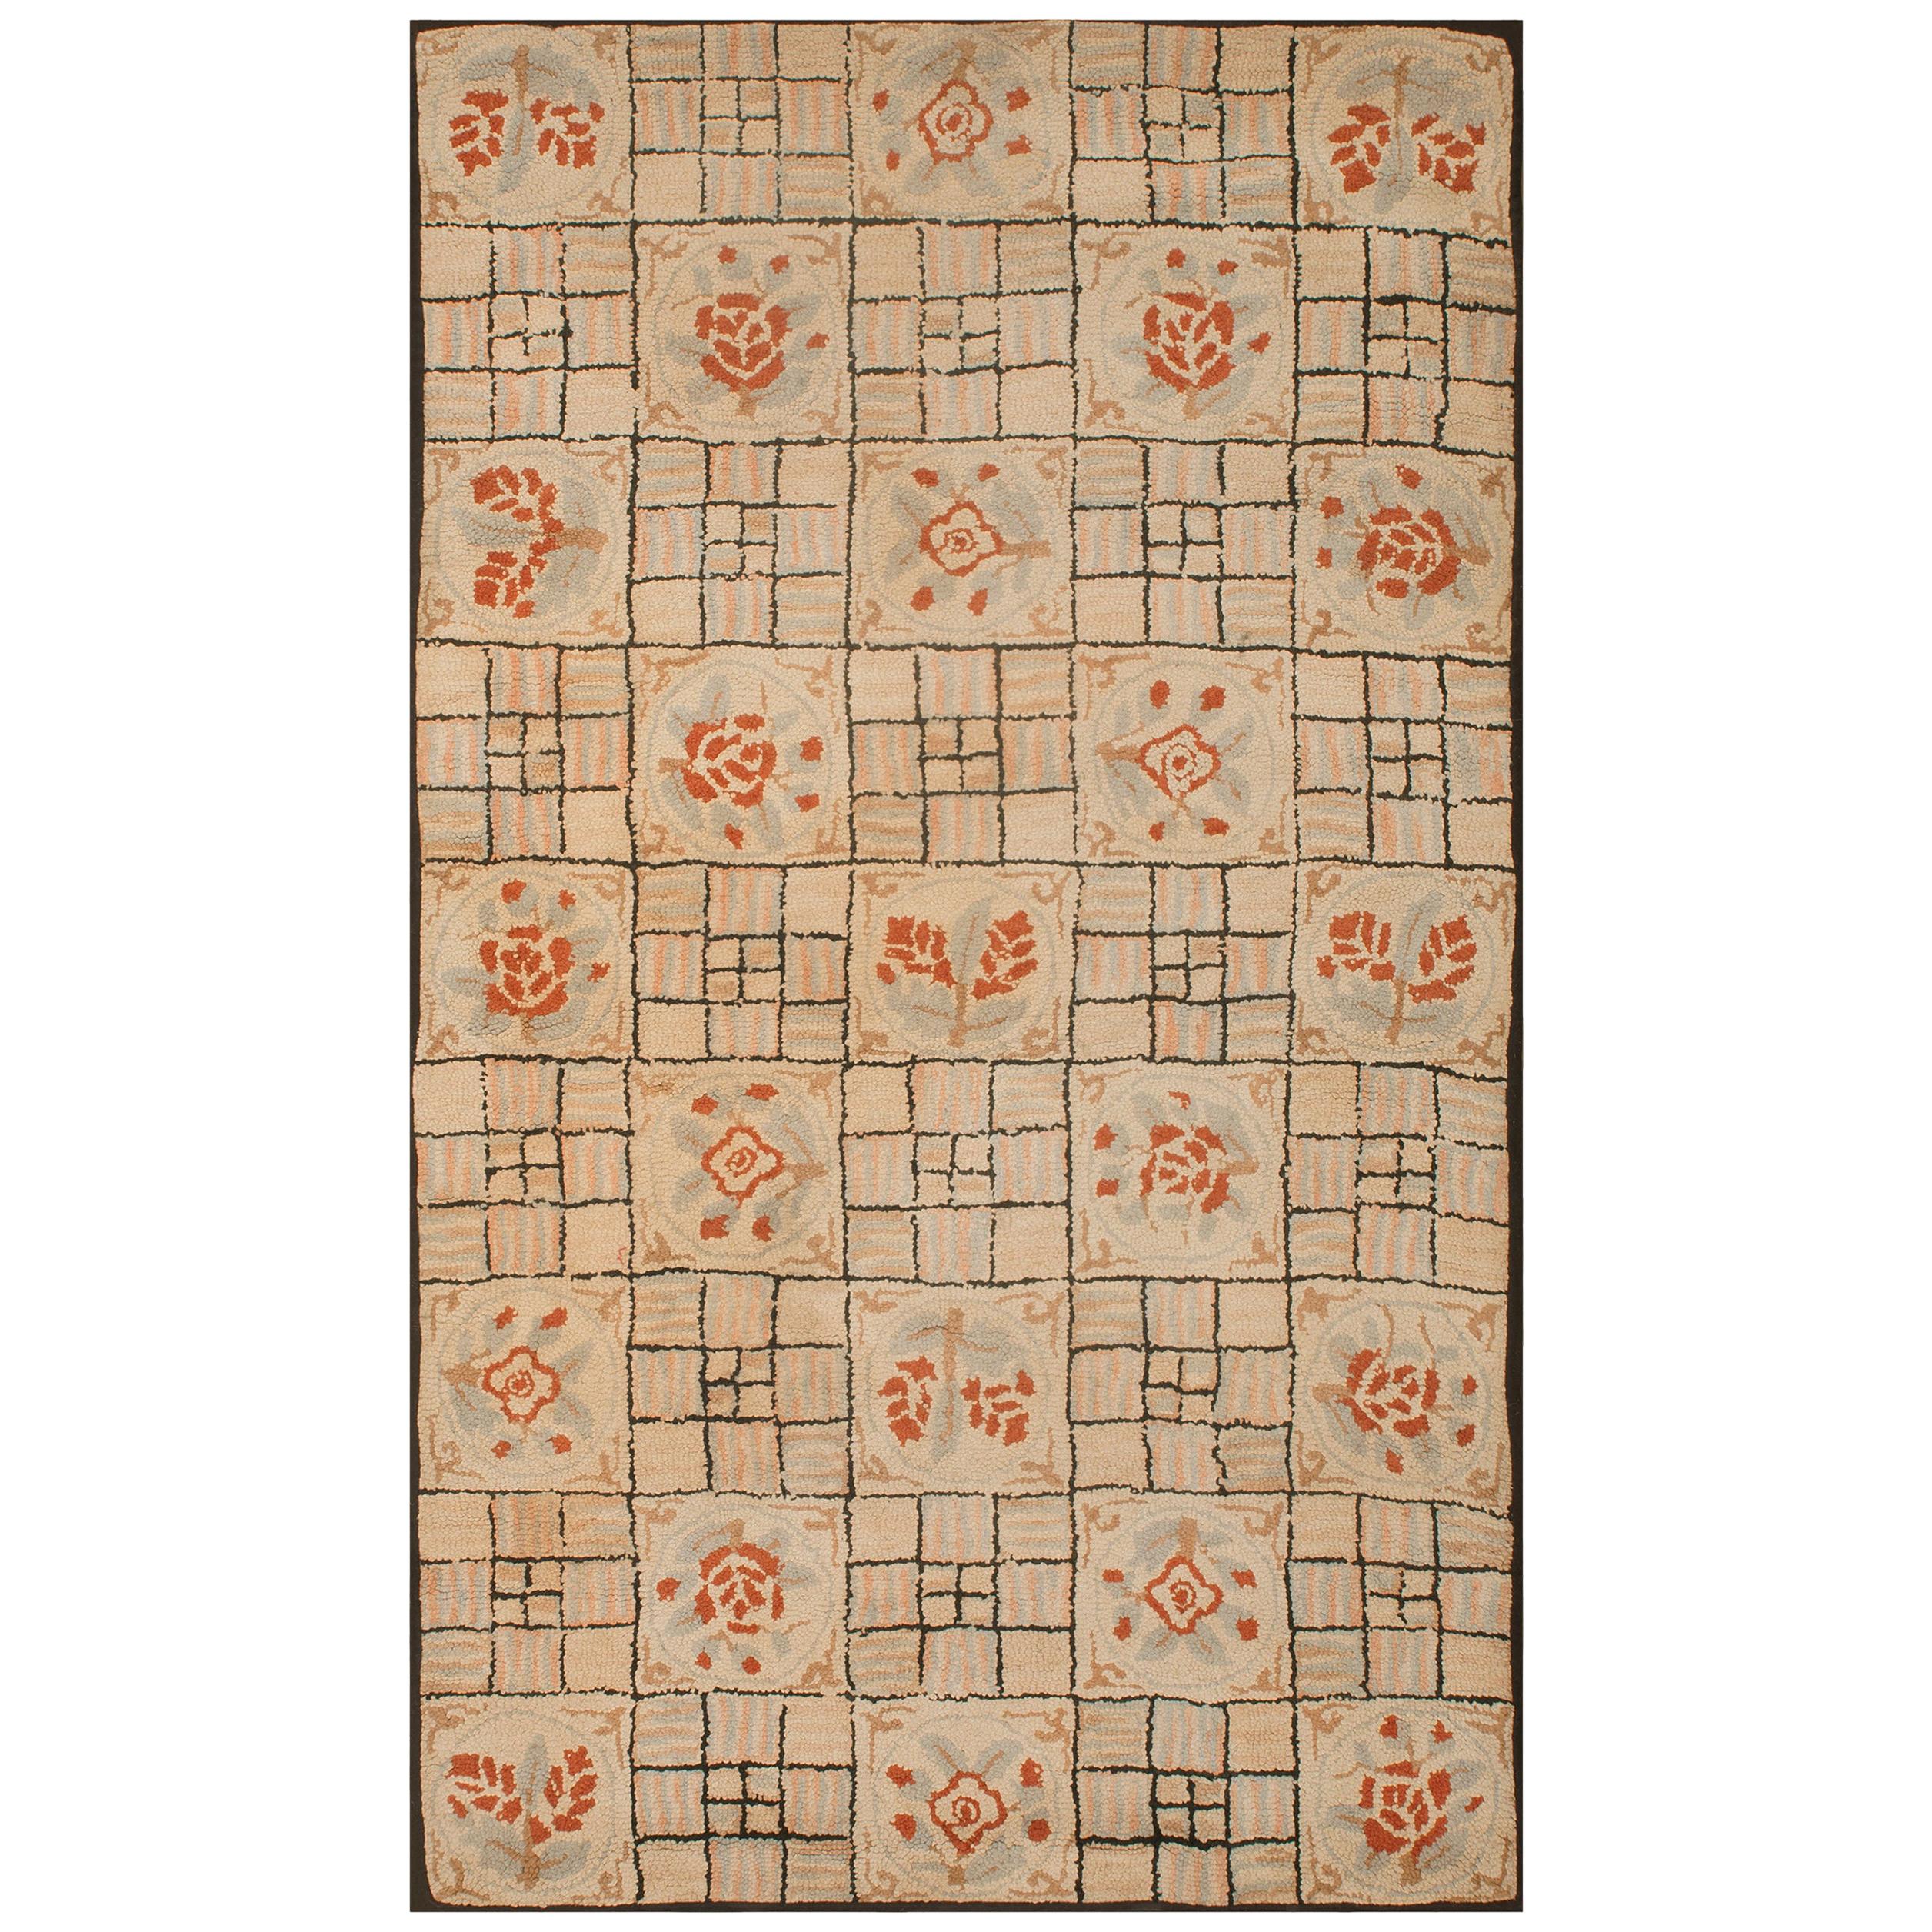 Early 20th Century American Hooked Rug ( 4' x 7'1" - 122 x 216 )